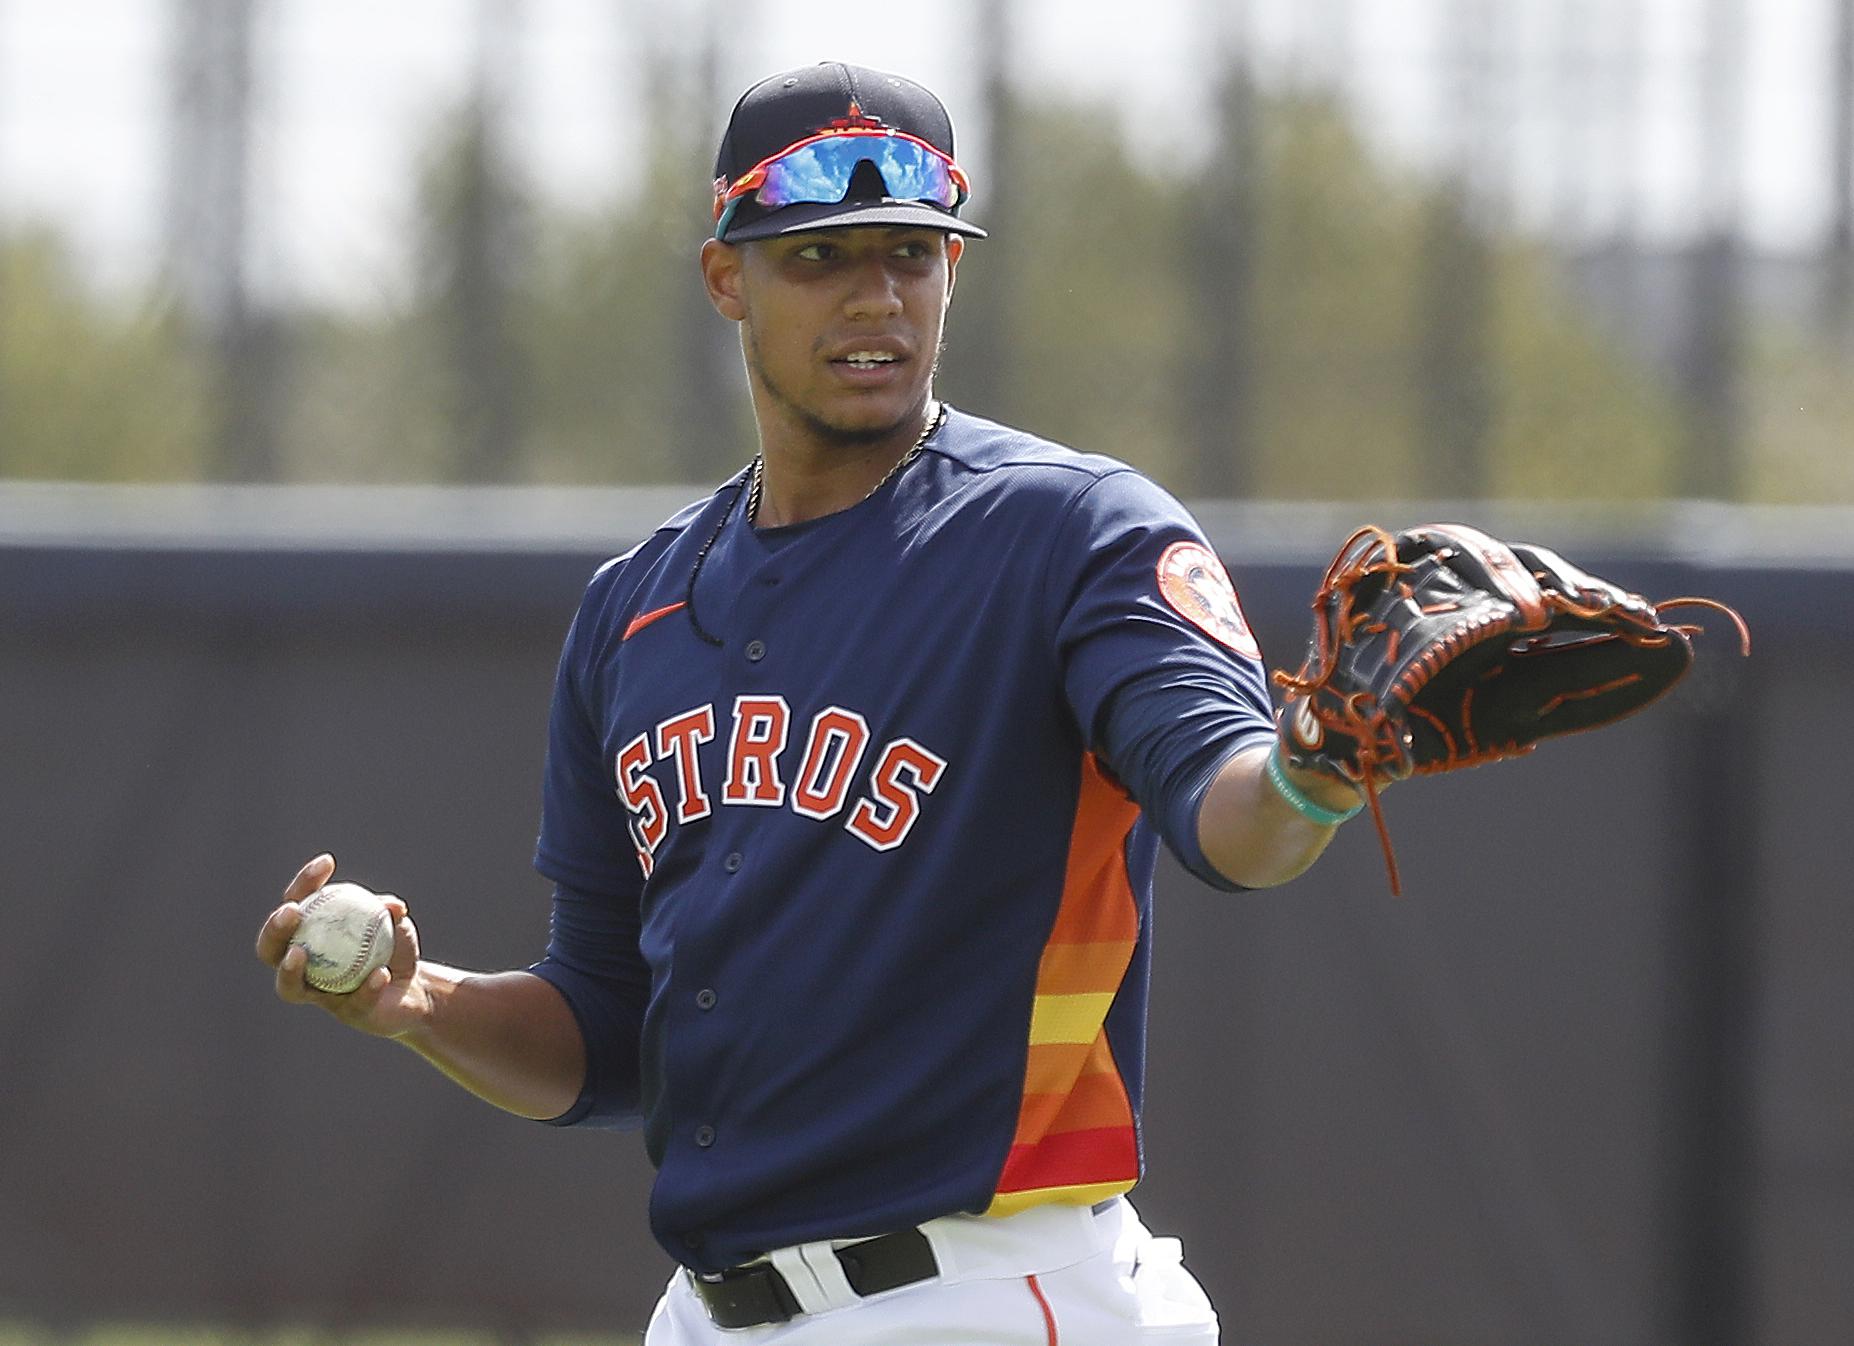 Bryan Abreu capitalizing on opportunity with Astros